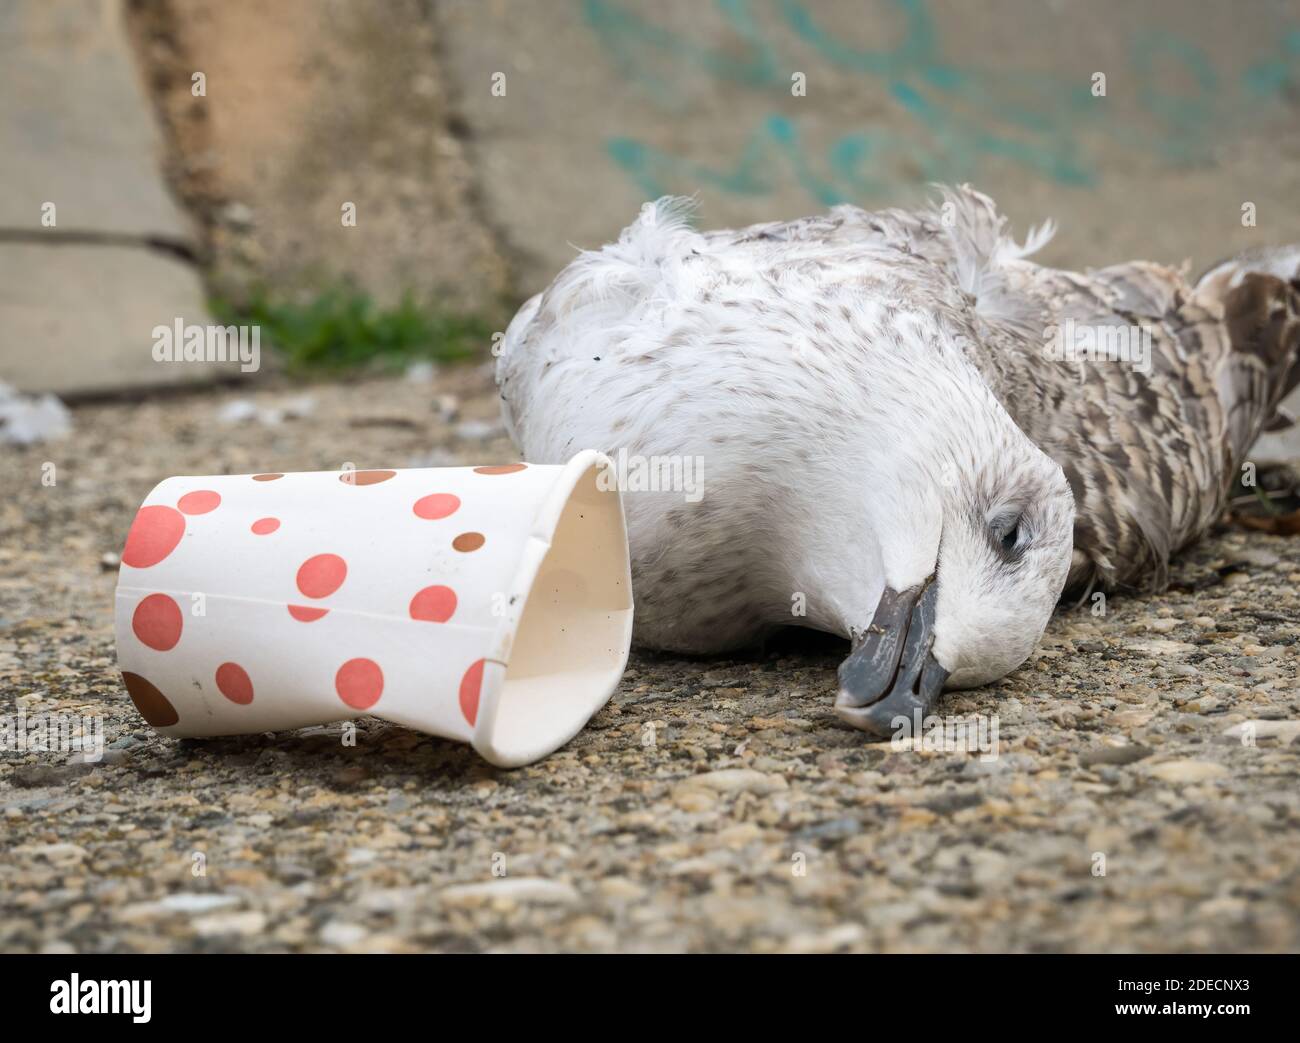 A dead seagull or bird at the edge of the water next to plastic waste.. Plastic pollution concept. Stock Photo